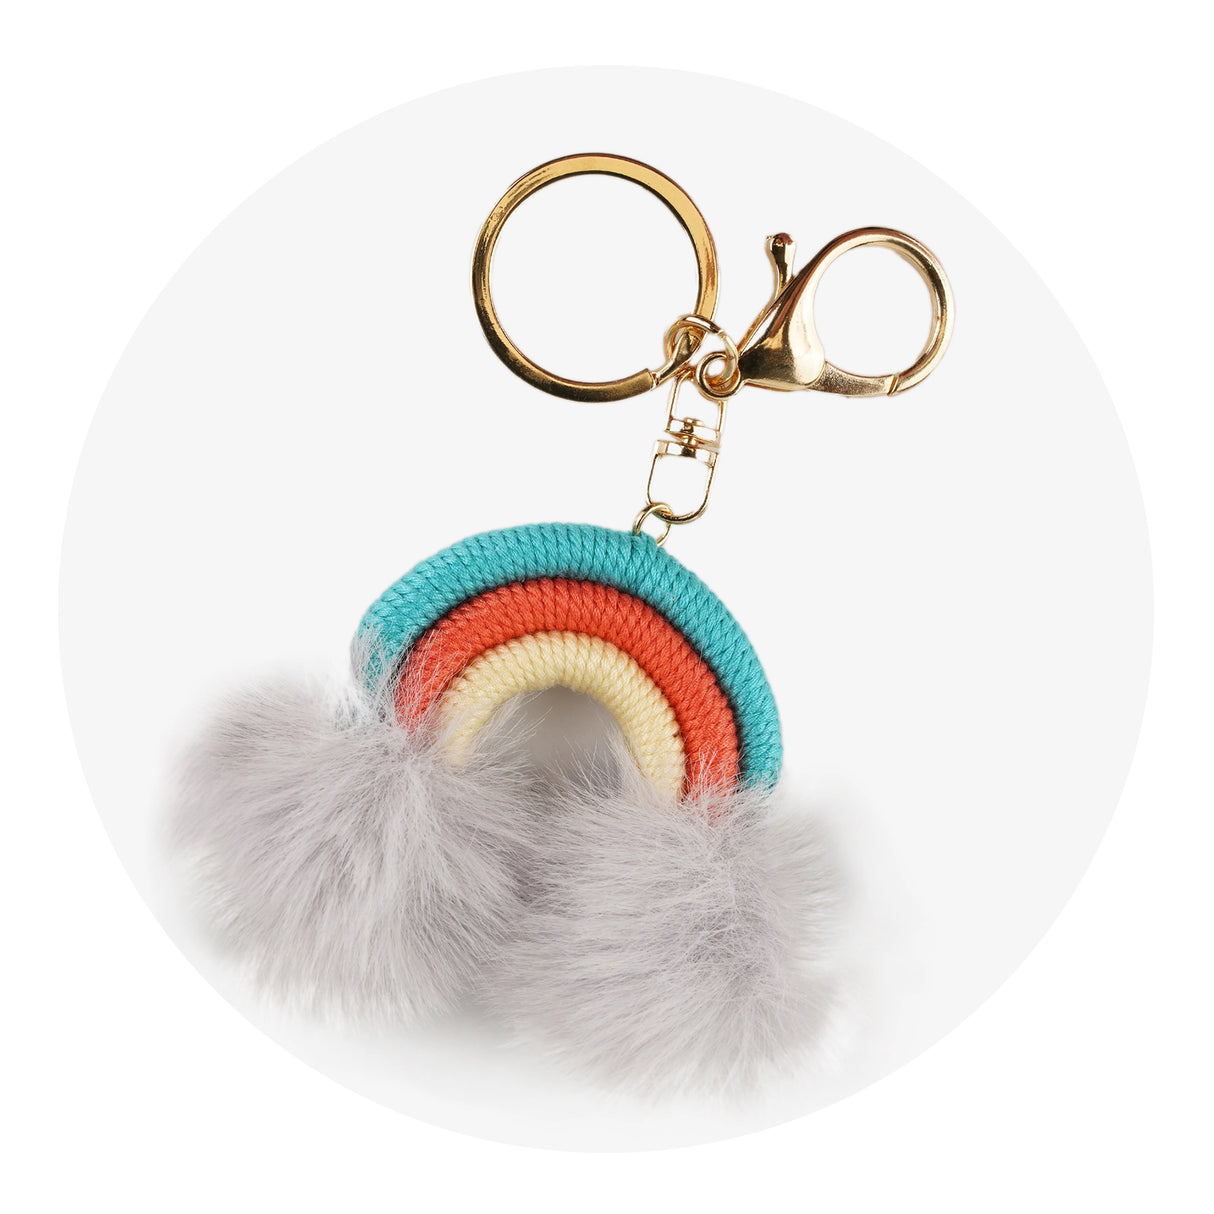 Keychain Woven Rainbow Pom with Lobster Claw - Teal & Umber